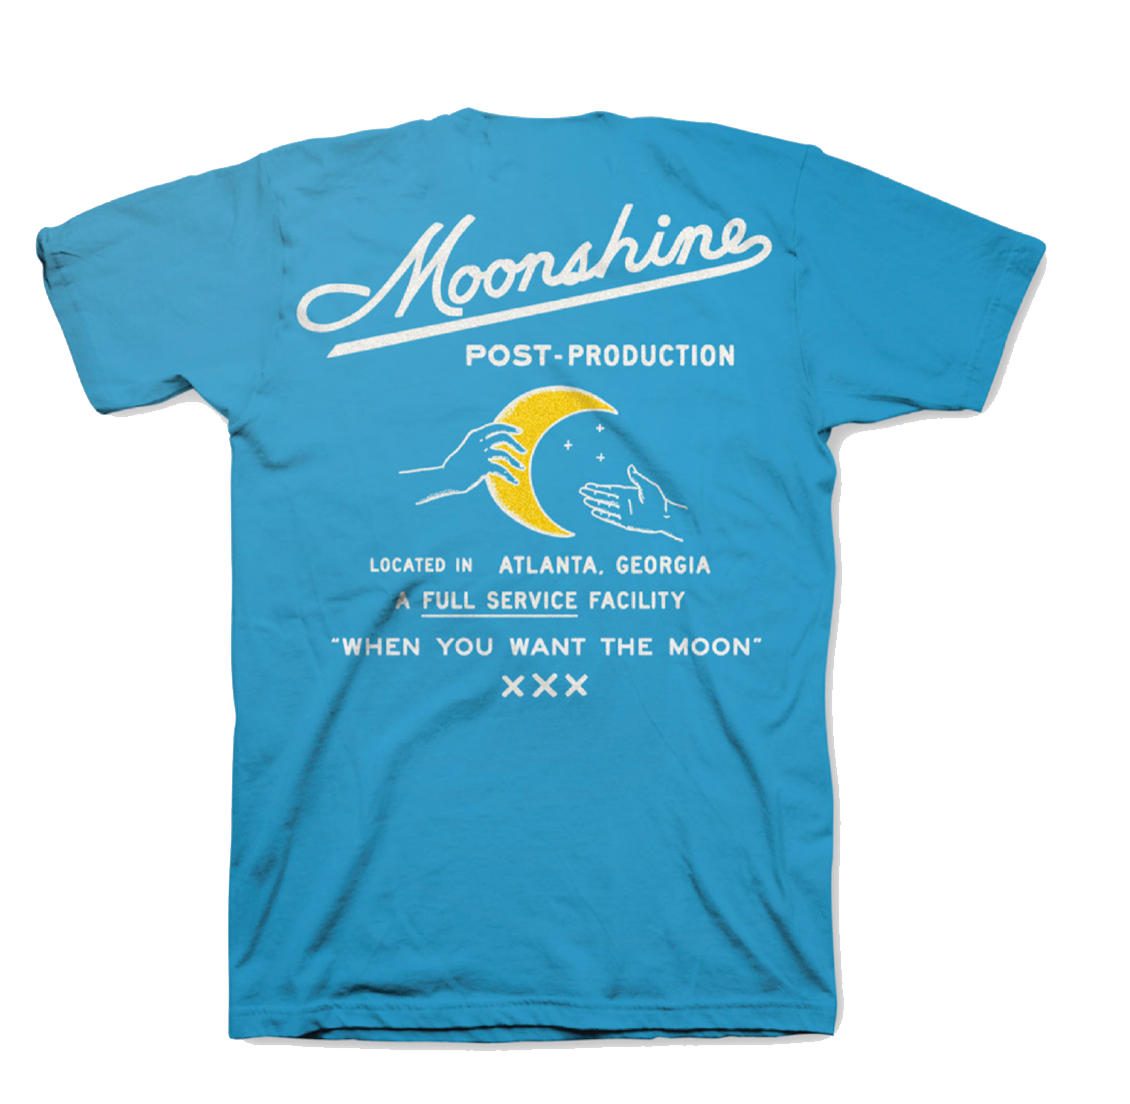 Moonshine 'When You Want the Moon' T-Shirt